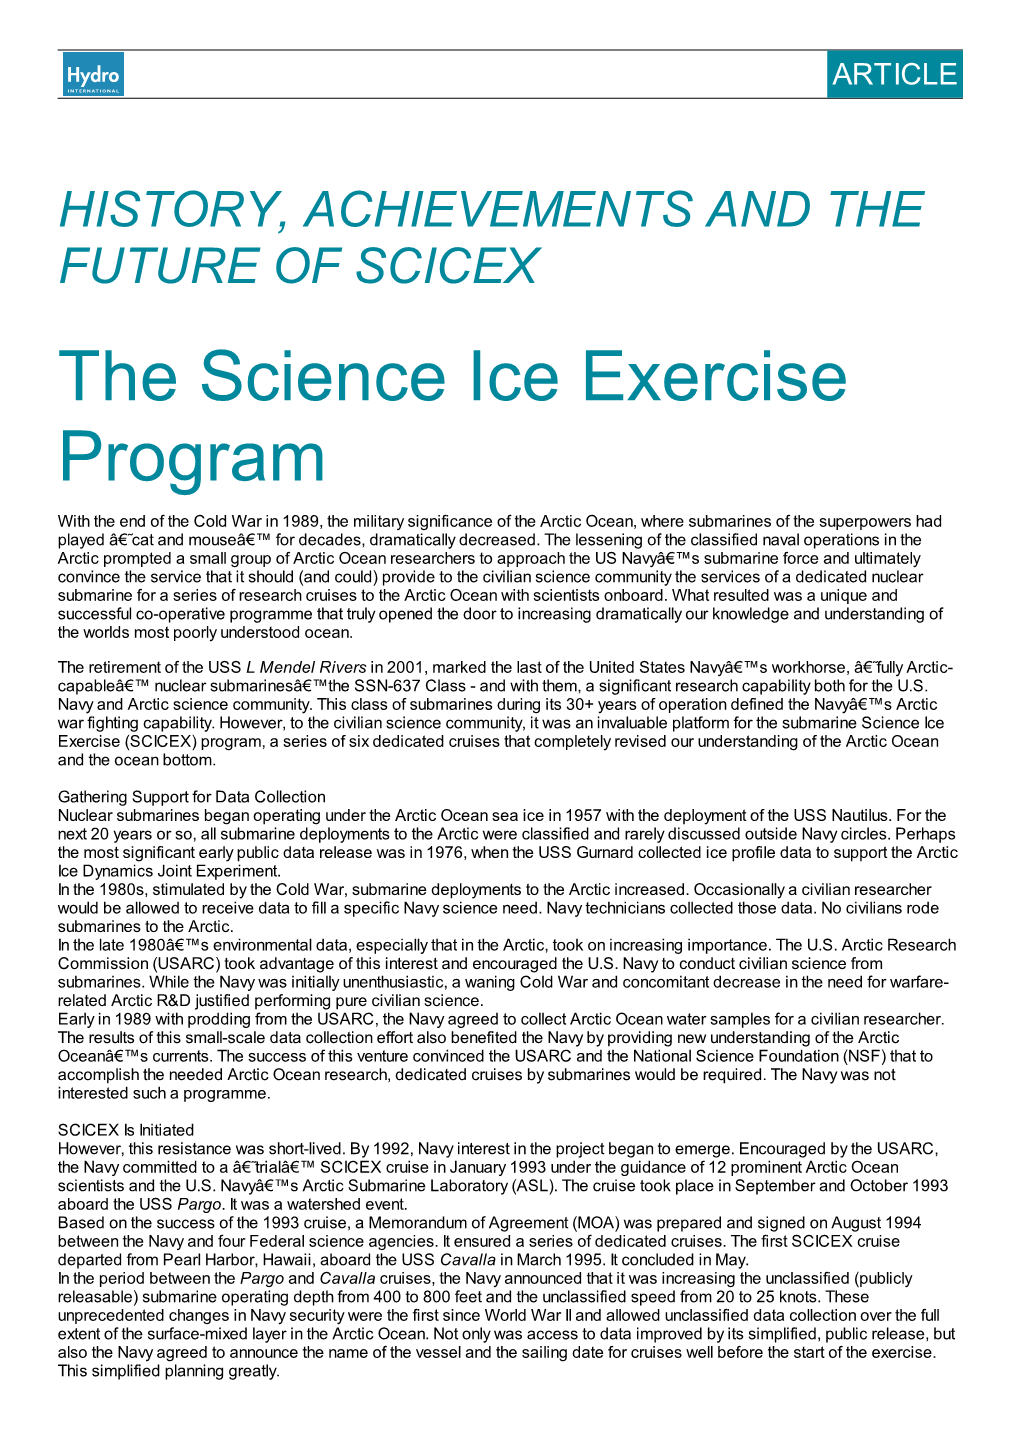 The Science Ice Exercise Program